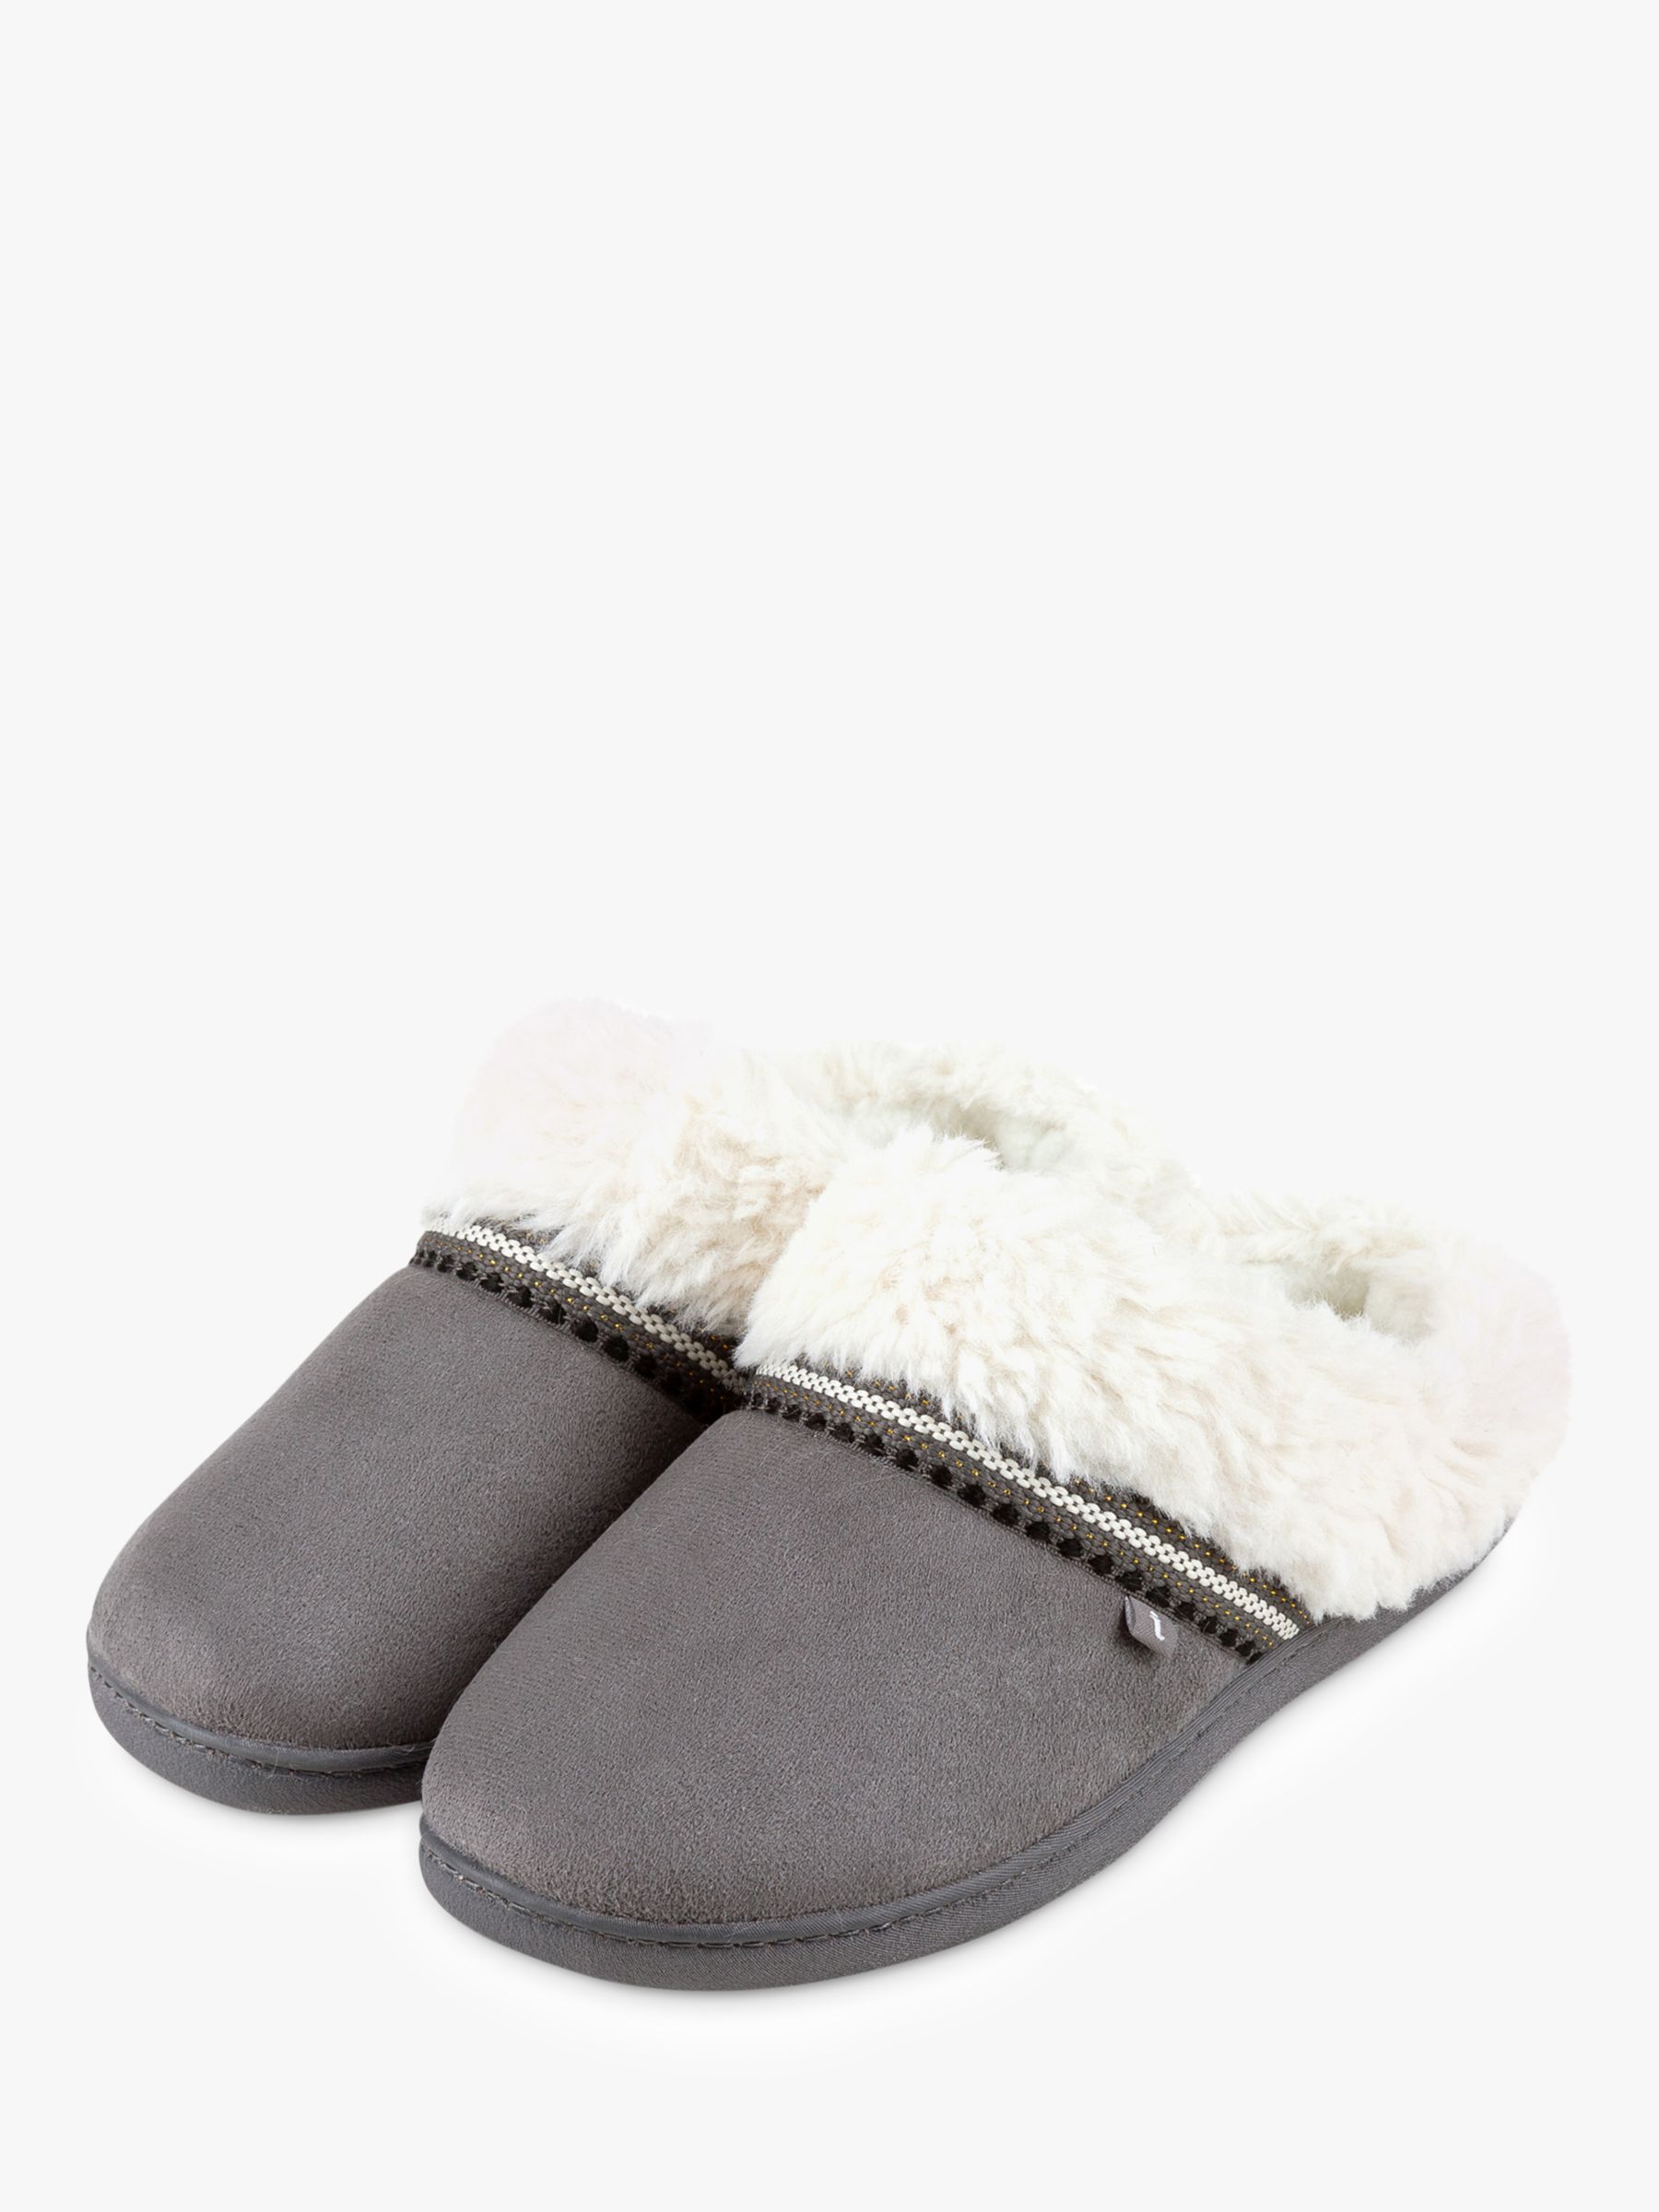 totes Suedette Mule Slippers, Grey